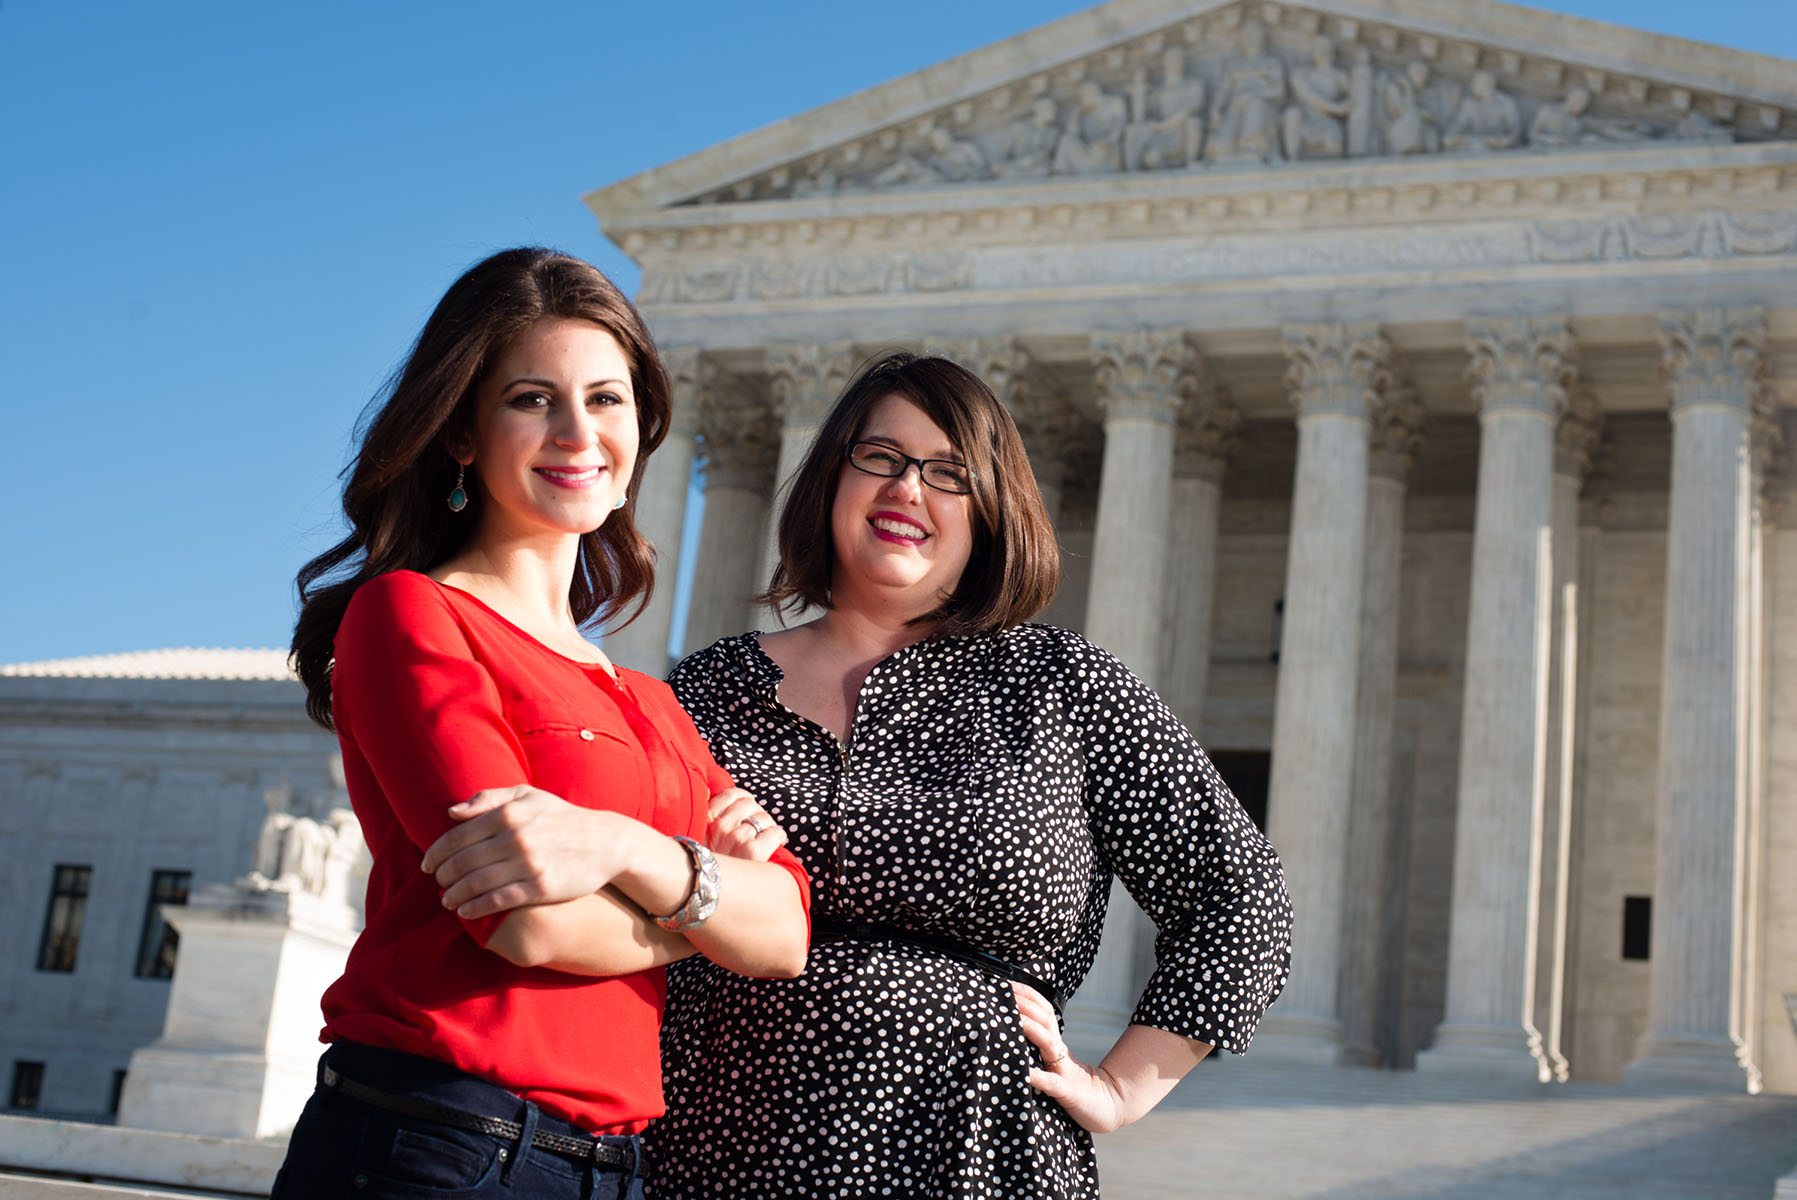 Anti-abortion activists Lila Rose (left) and Kristan Hawkins smile as they pose for a portrait on the Supreme Court steps.